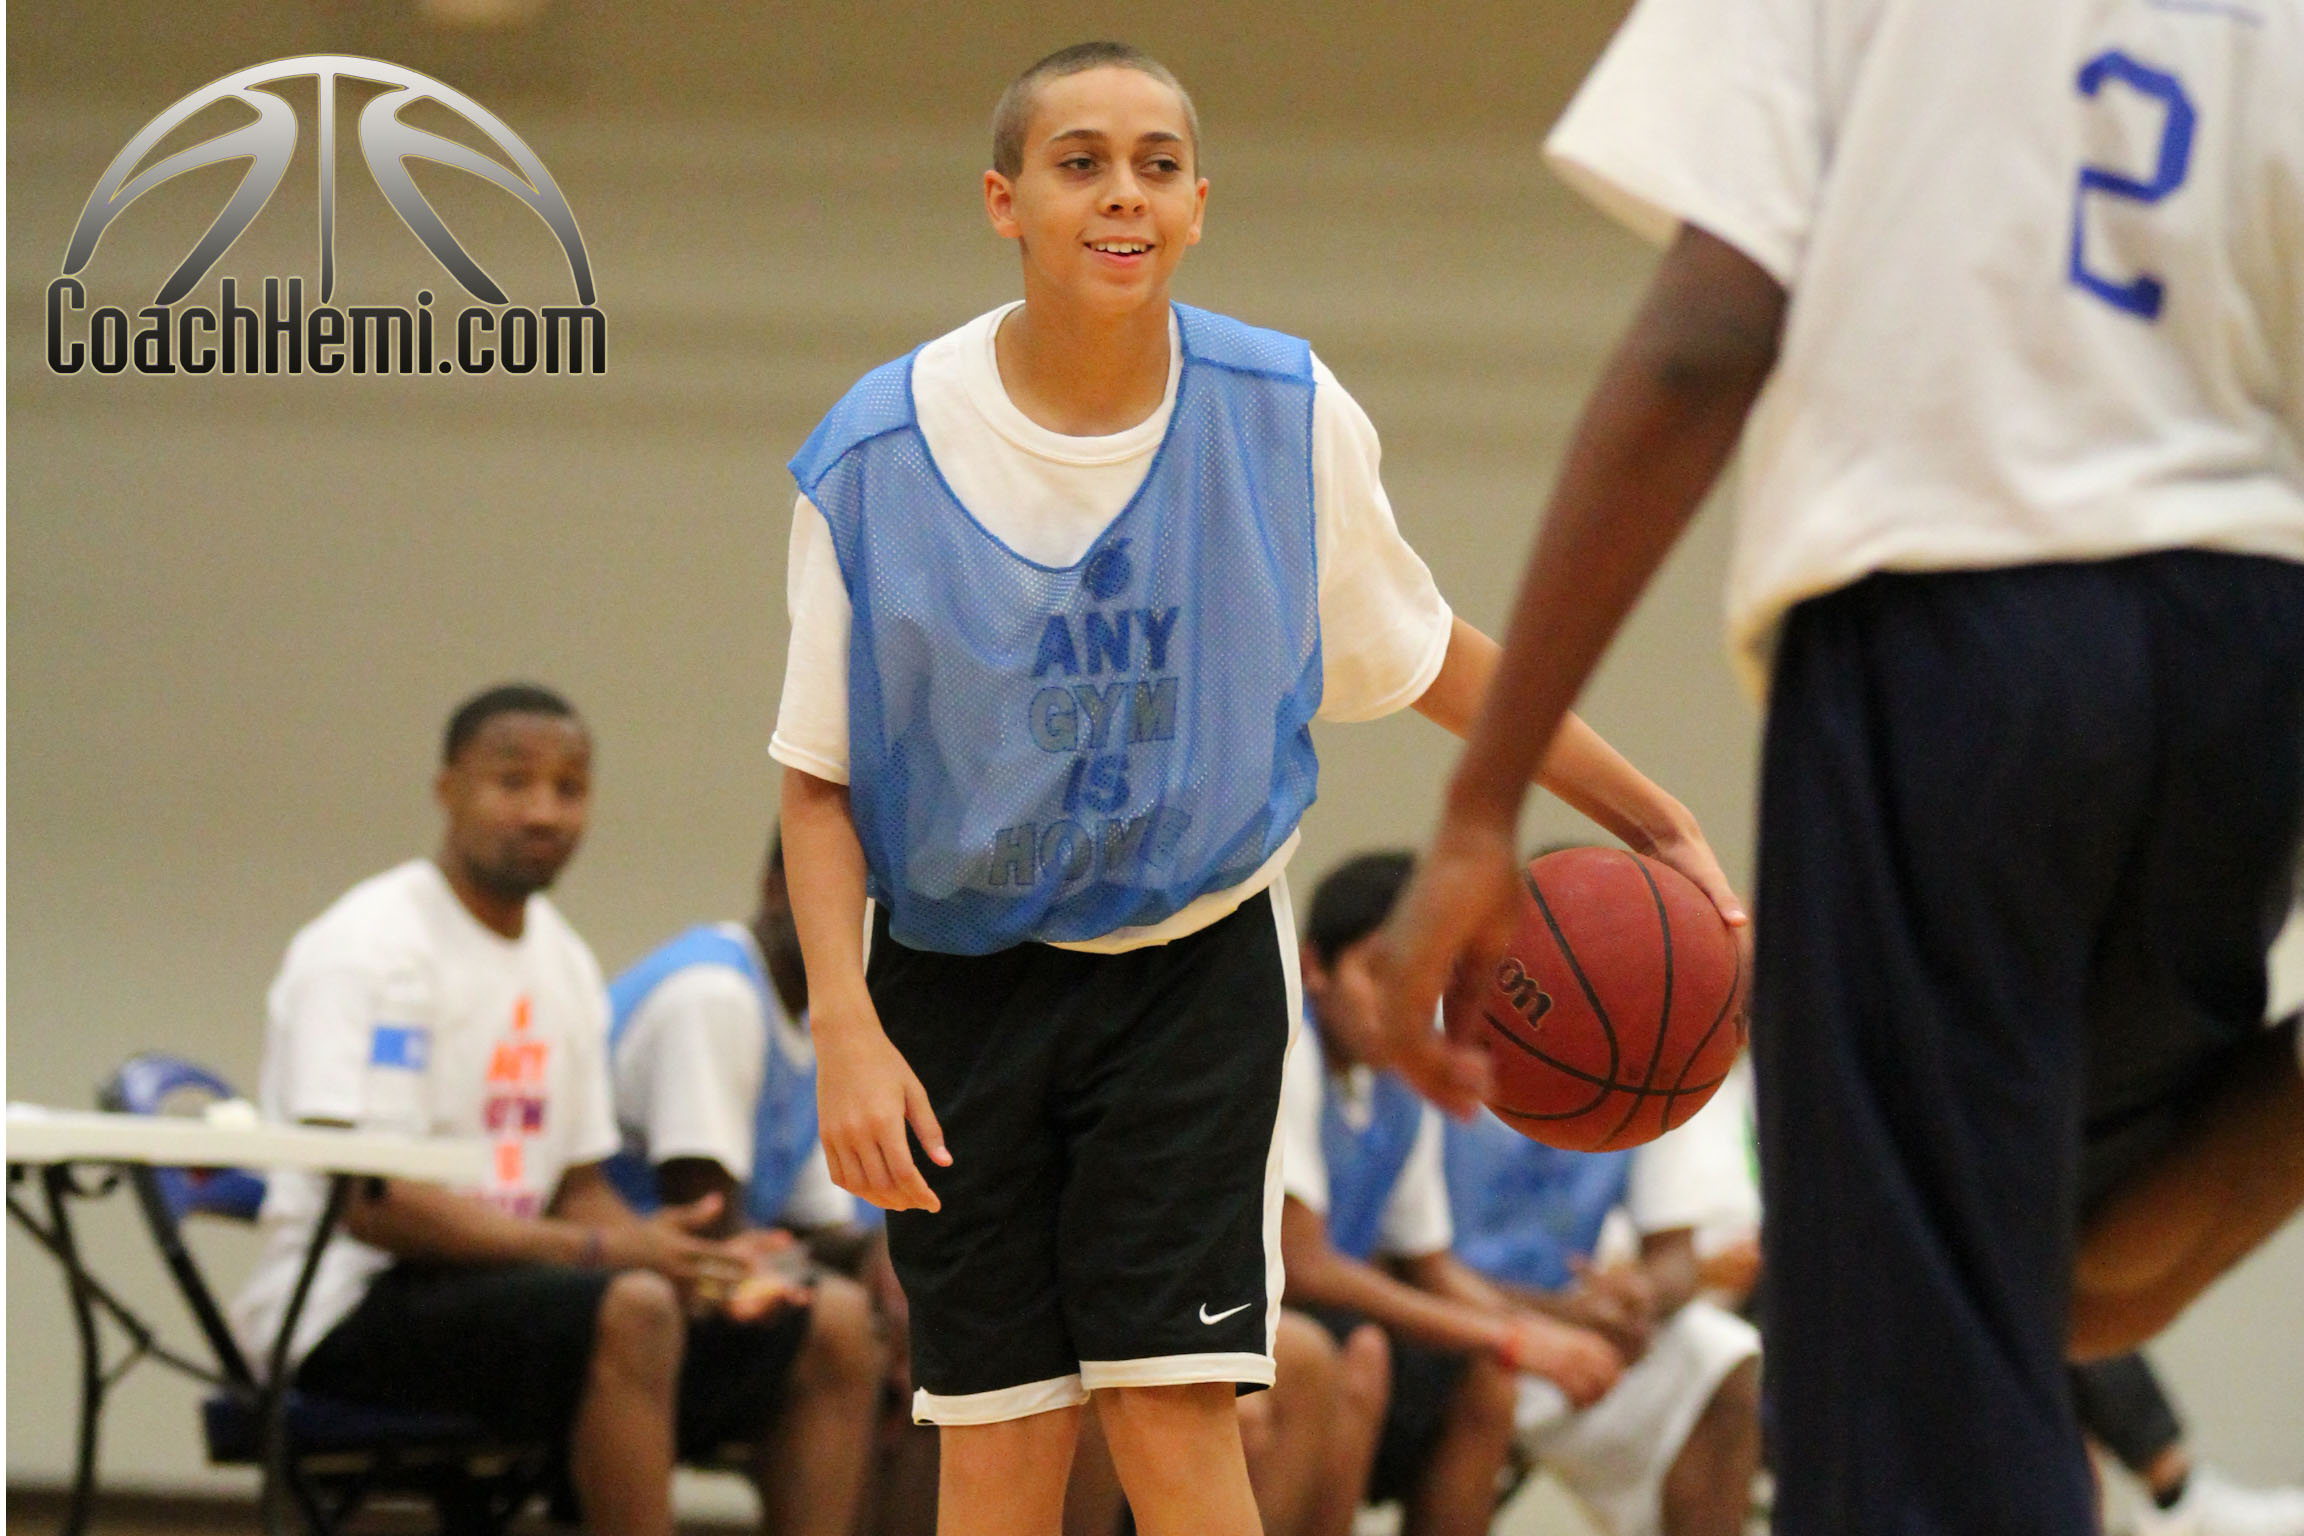 #OTRHoopsReport: Coach Hemi Fall Workout Player Evaluations - October 15, 2014